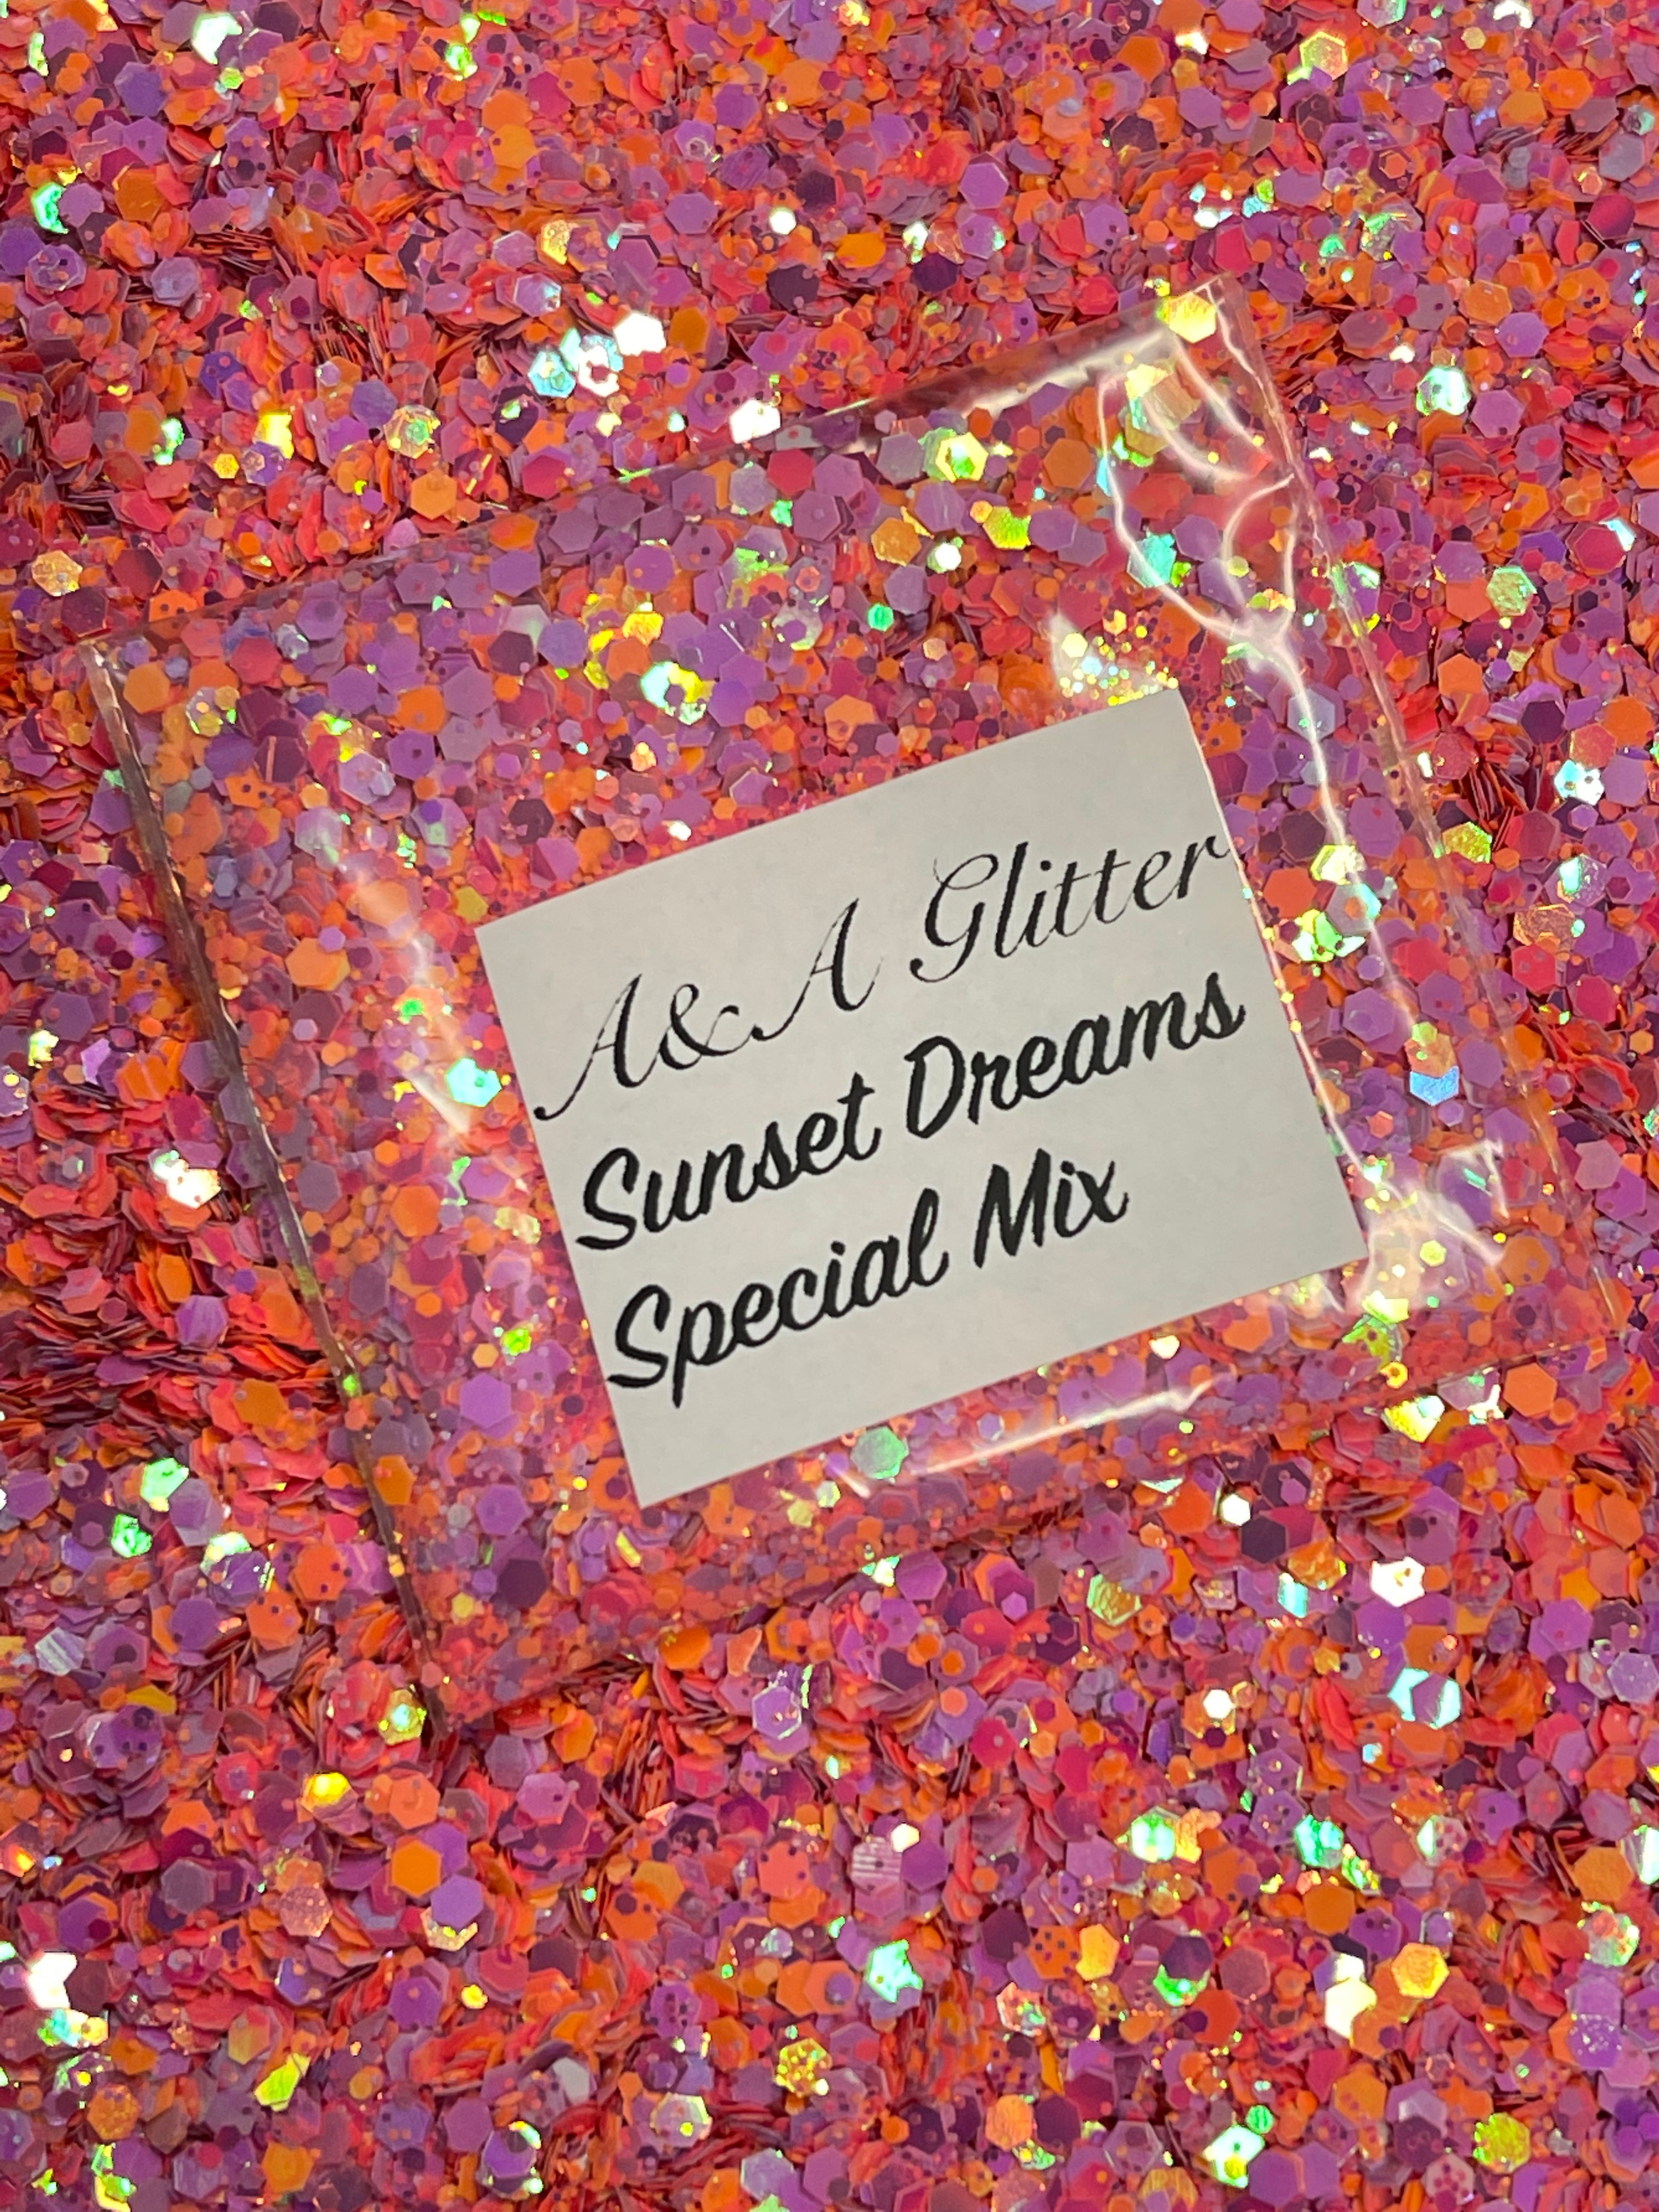 Sunset Dreams - Special Mix